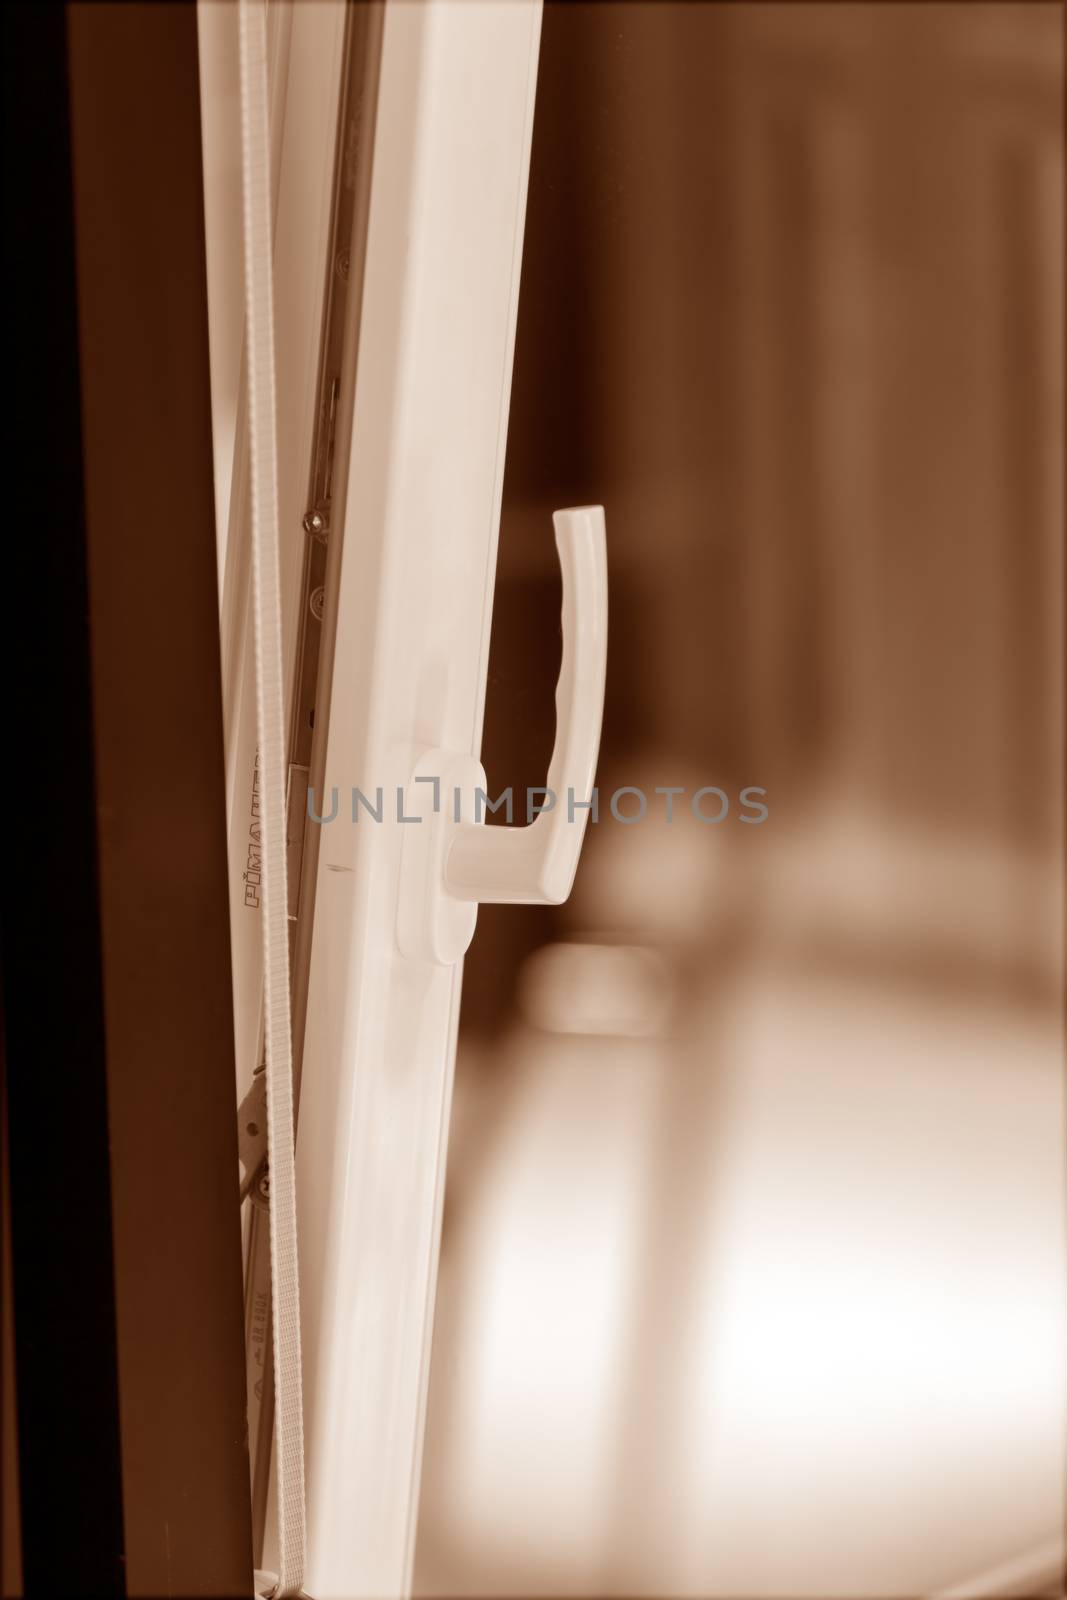 system to close doors, note shallow depth of field